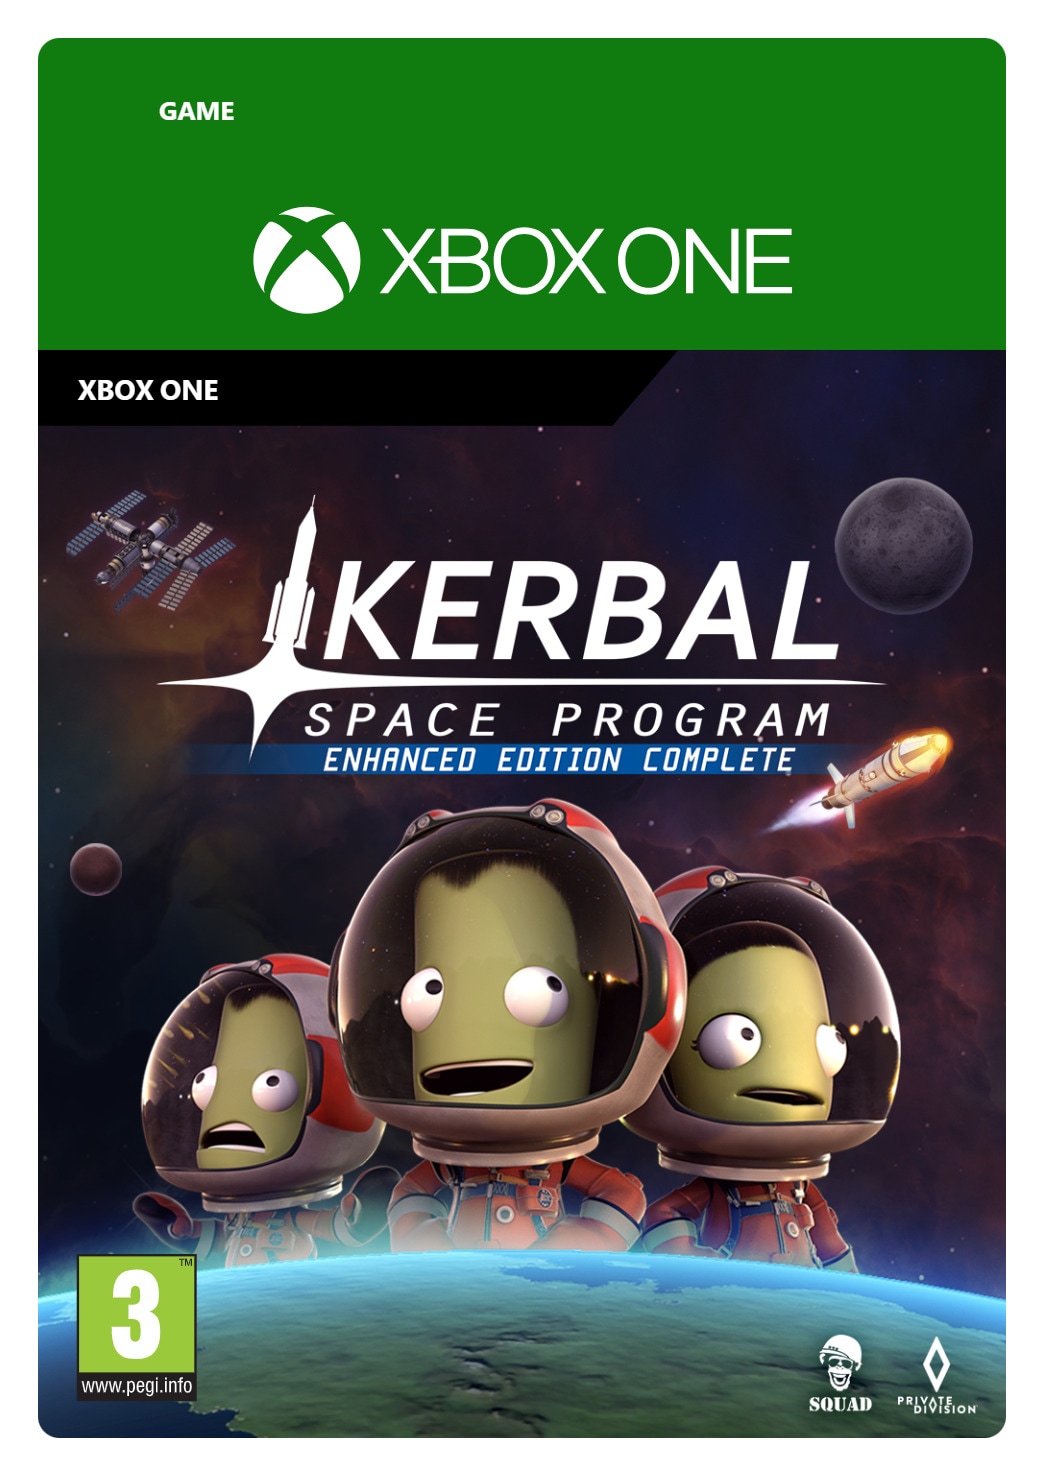 Kerbal Space Program: Complete Enhanced Edition - XBOX One